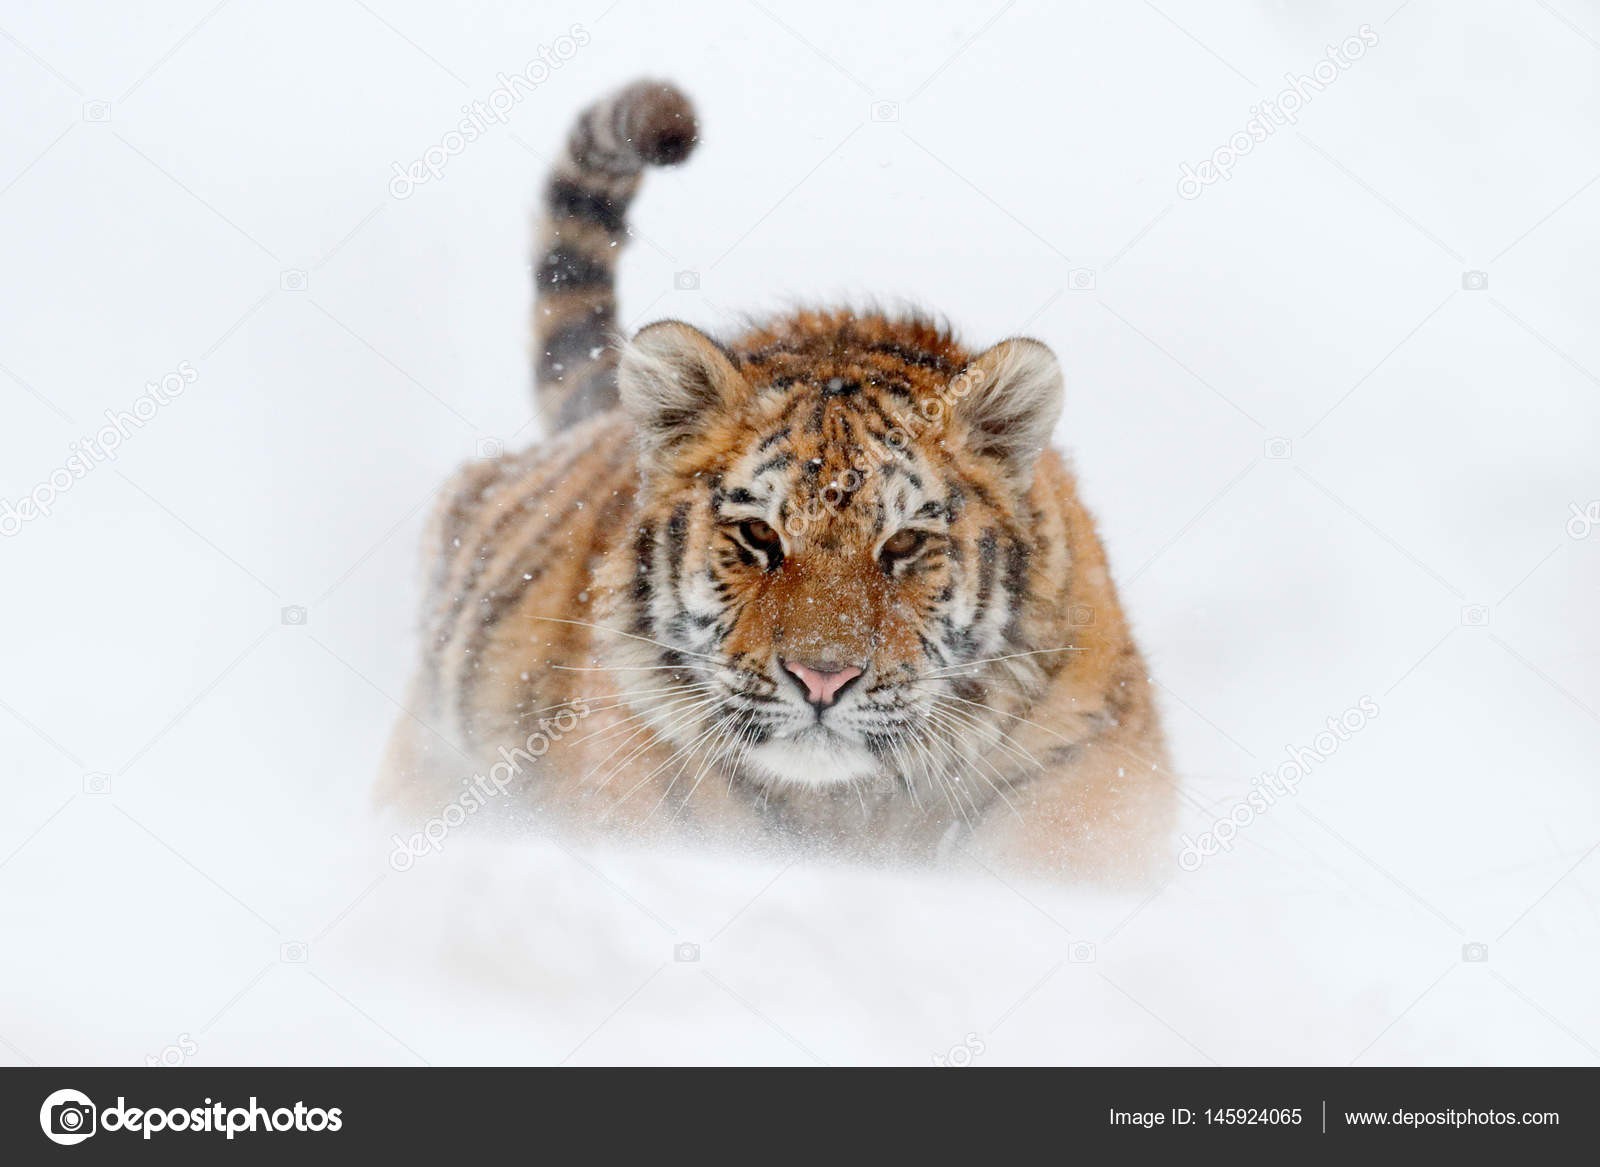 Close up portrait of Amur (Siberian) tiger in forest, looking at